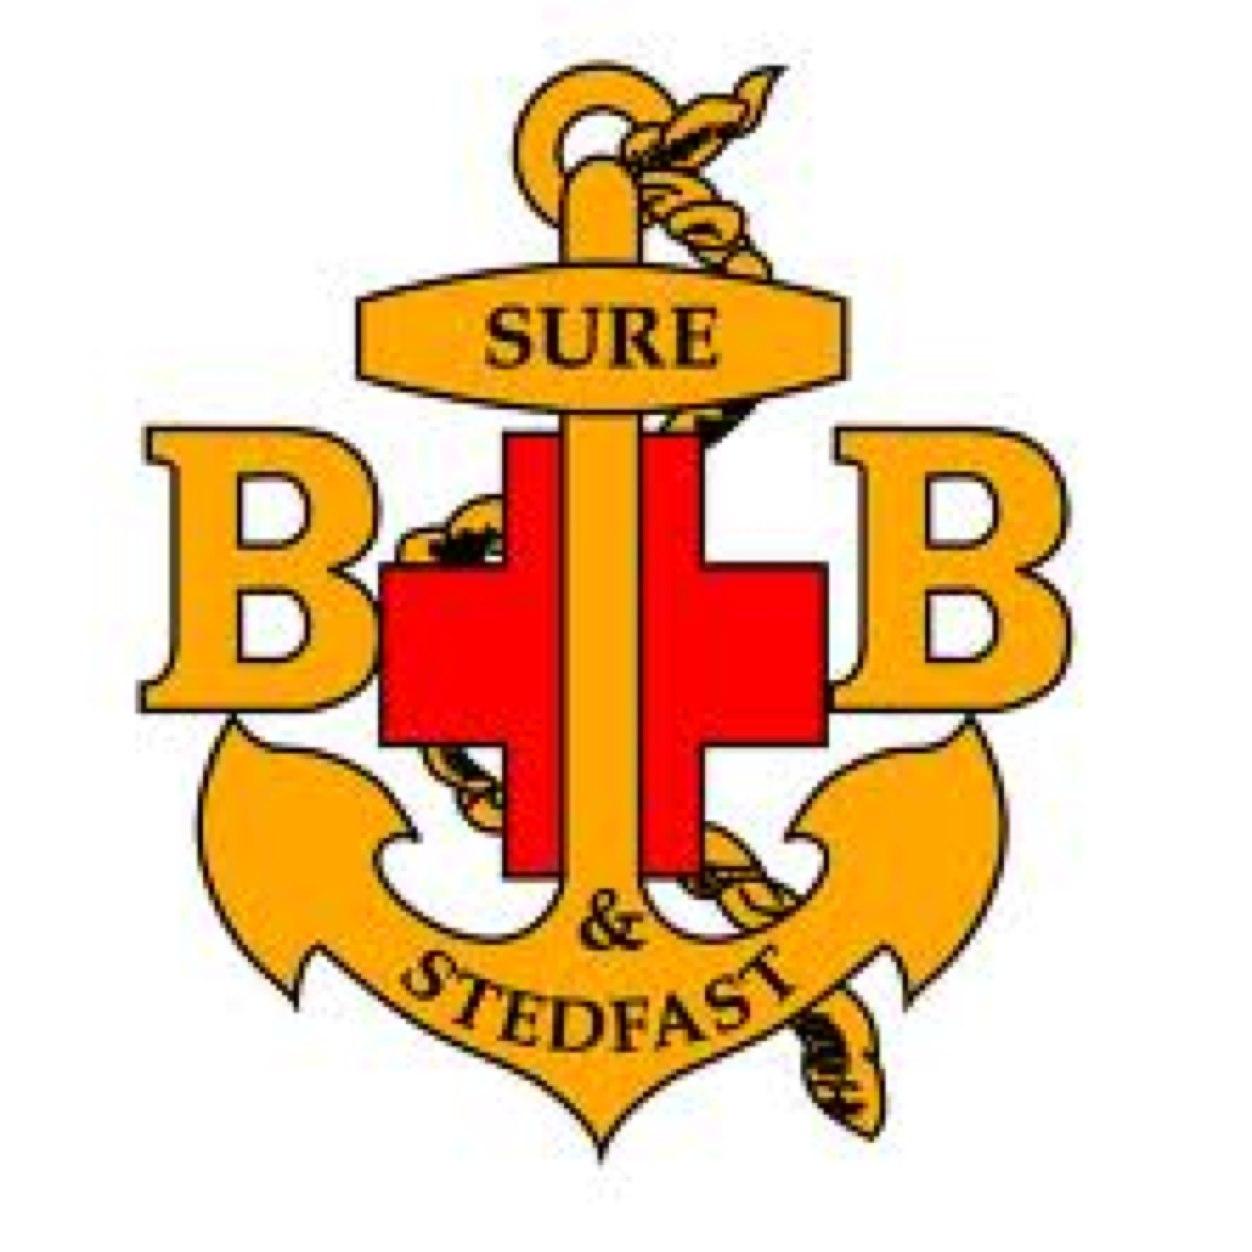 Promoting the Youth and Community of Abram since 1944. Facebook: 15th Wigan Boys Brigade and Girls Association. Affiliated member of the Royal British Legion.